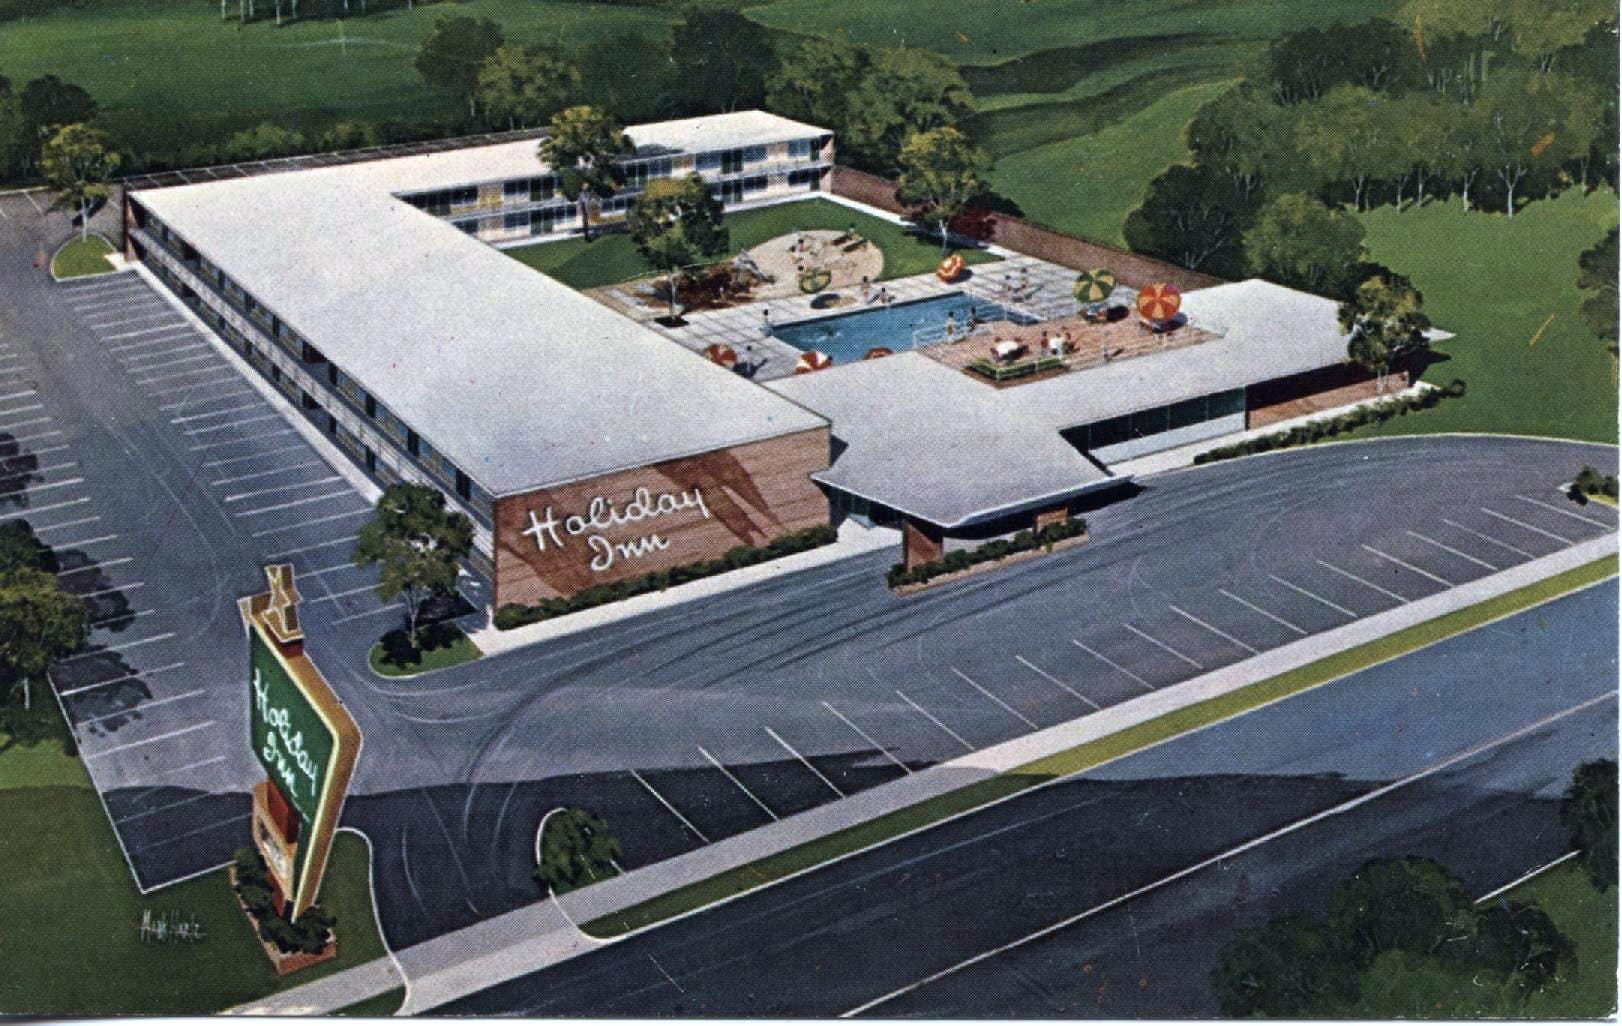 Postcard image of a Holiday Inn with a pool in the courtyard.